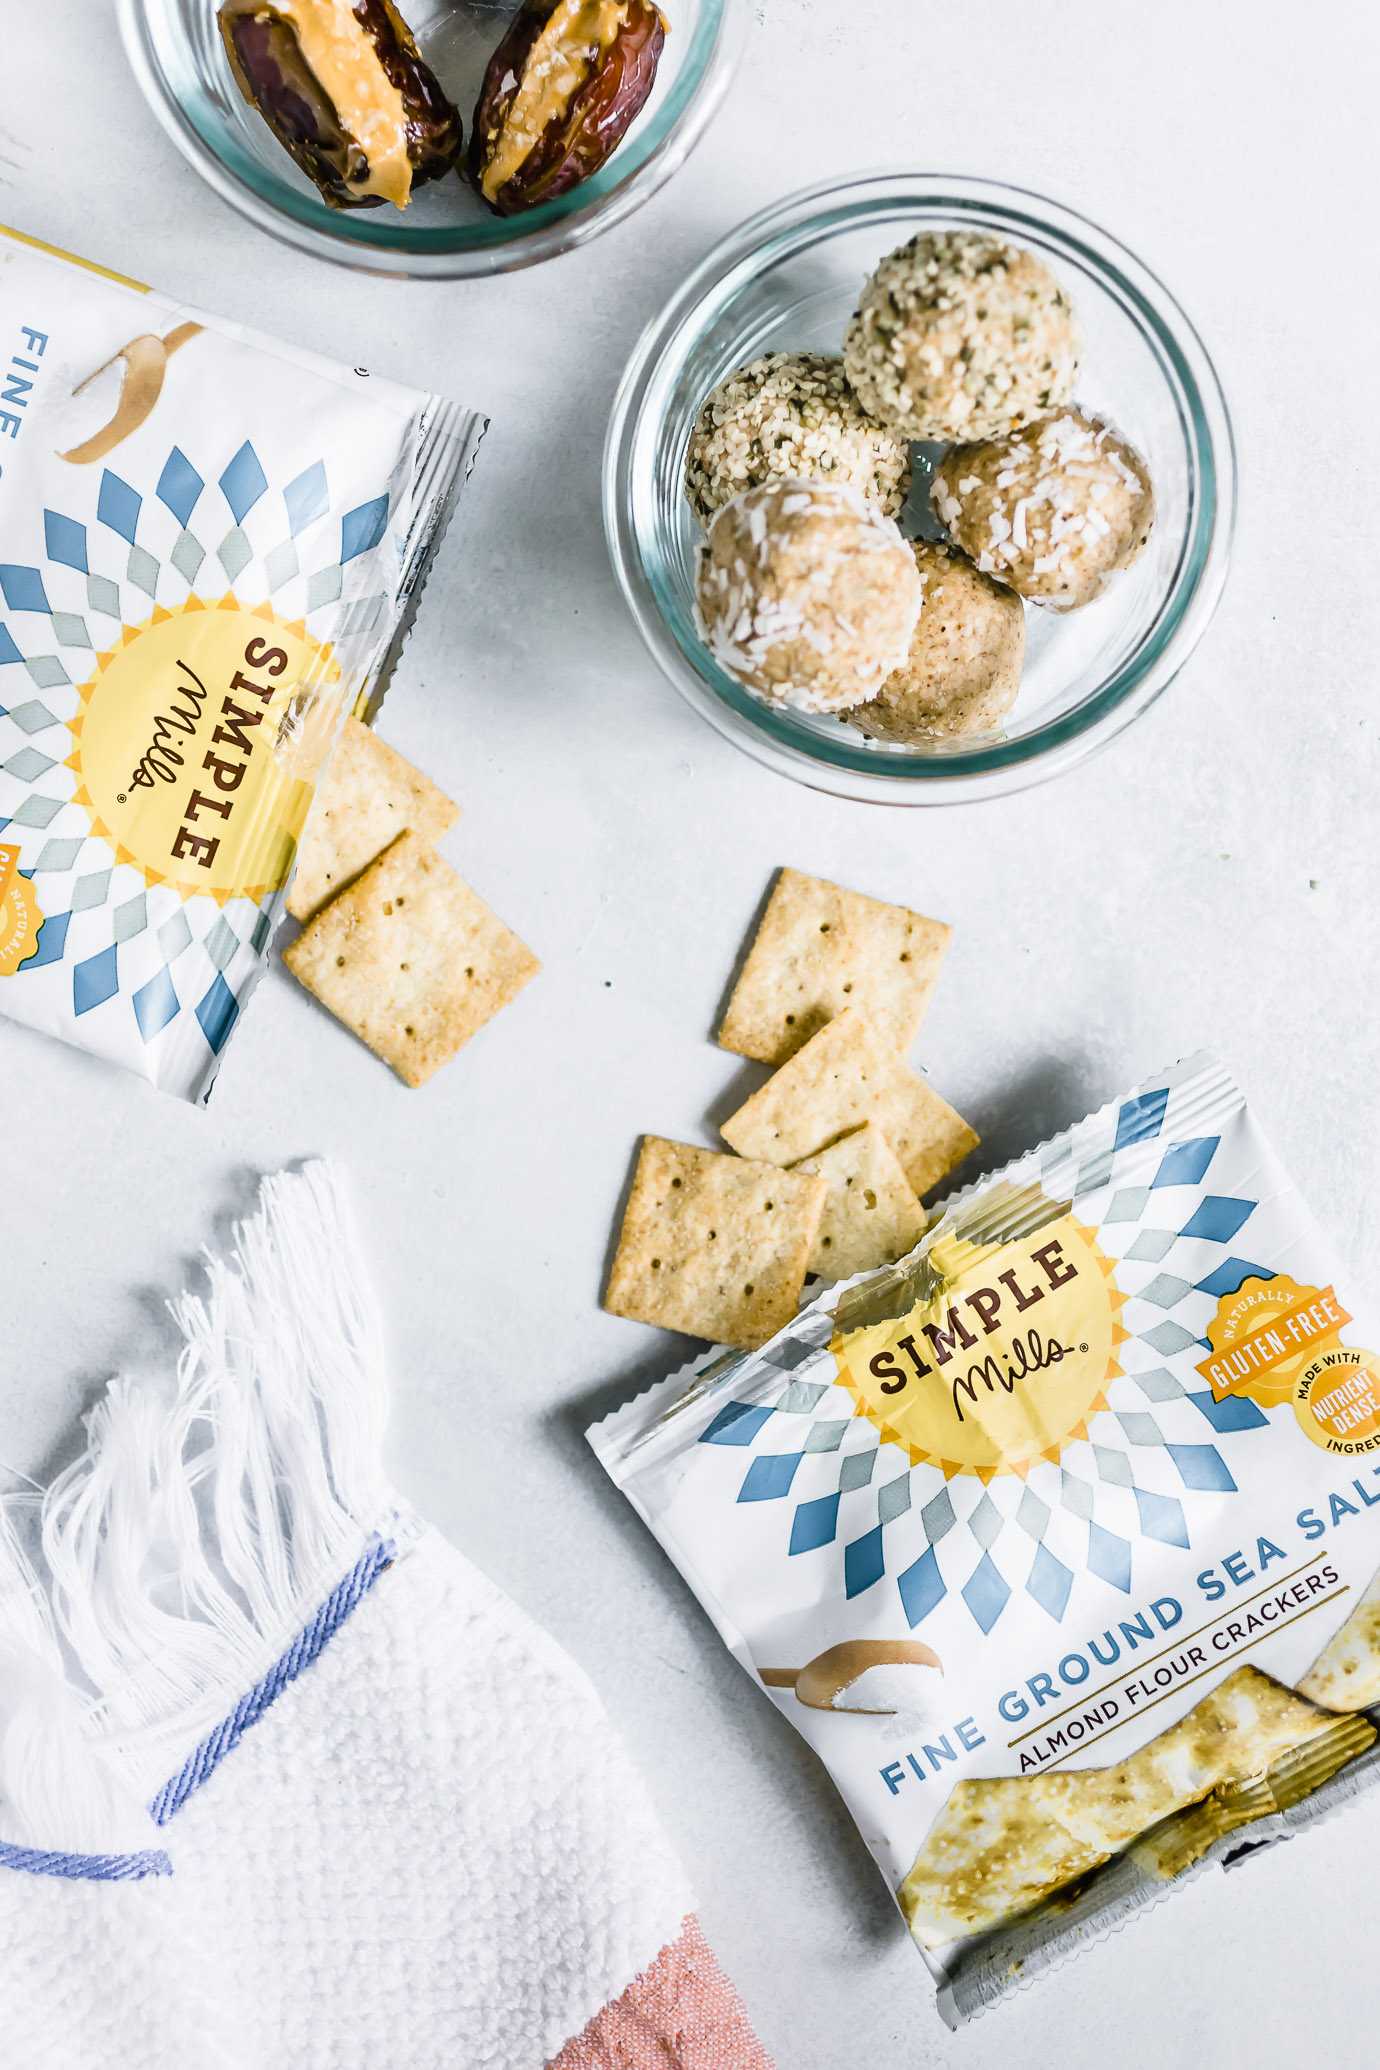 5 Simple Healthy Snacks for Summer featuring Simple Mills Almond Flour Crackers